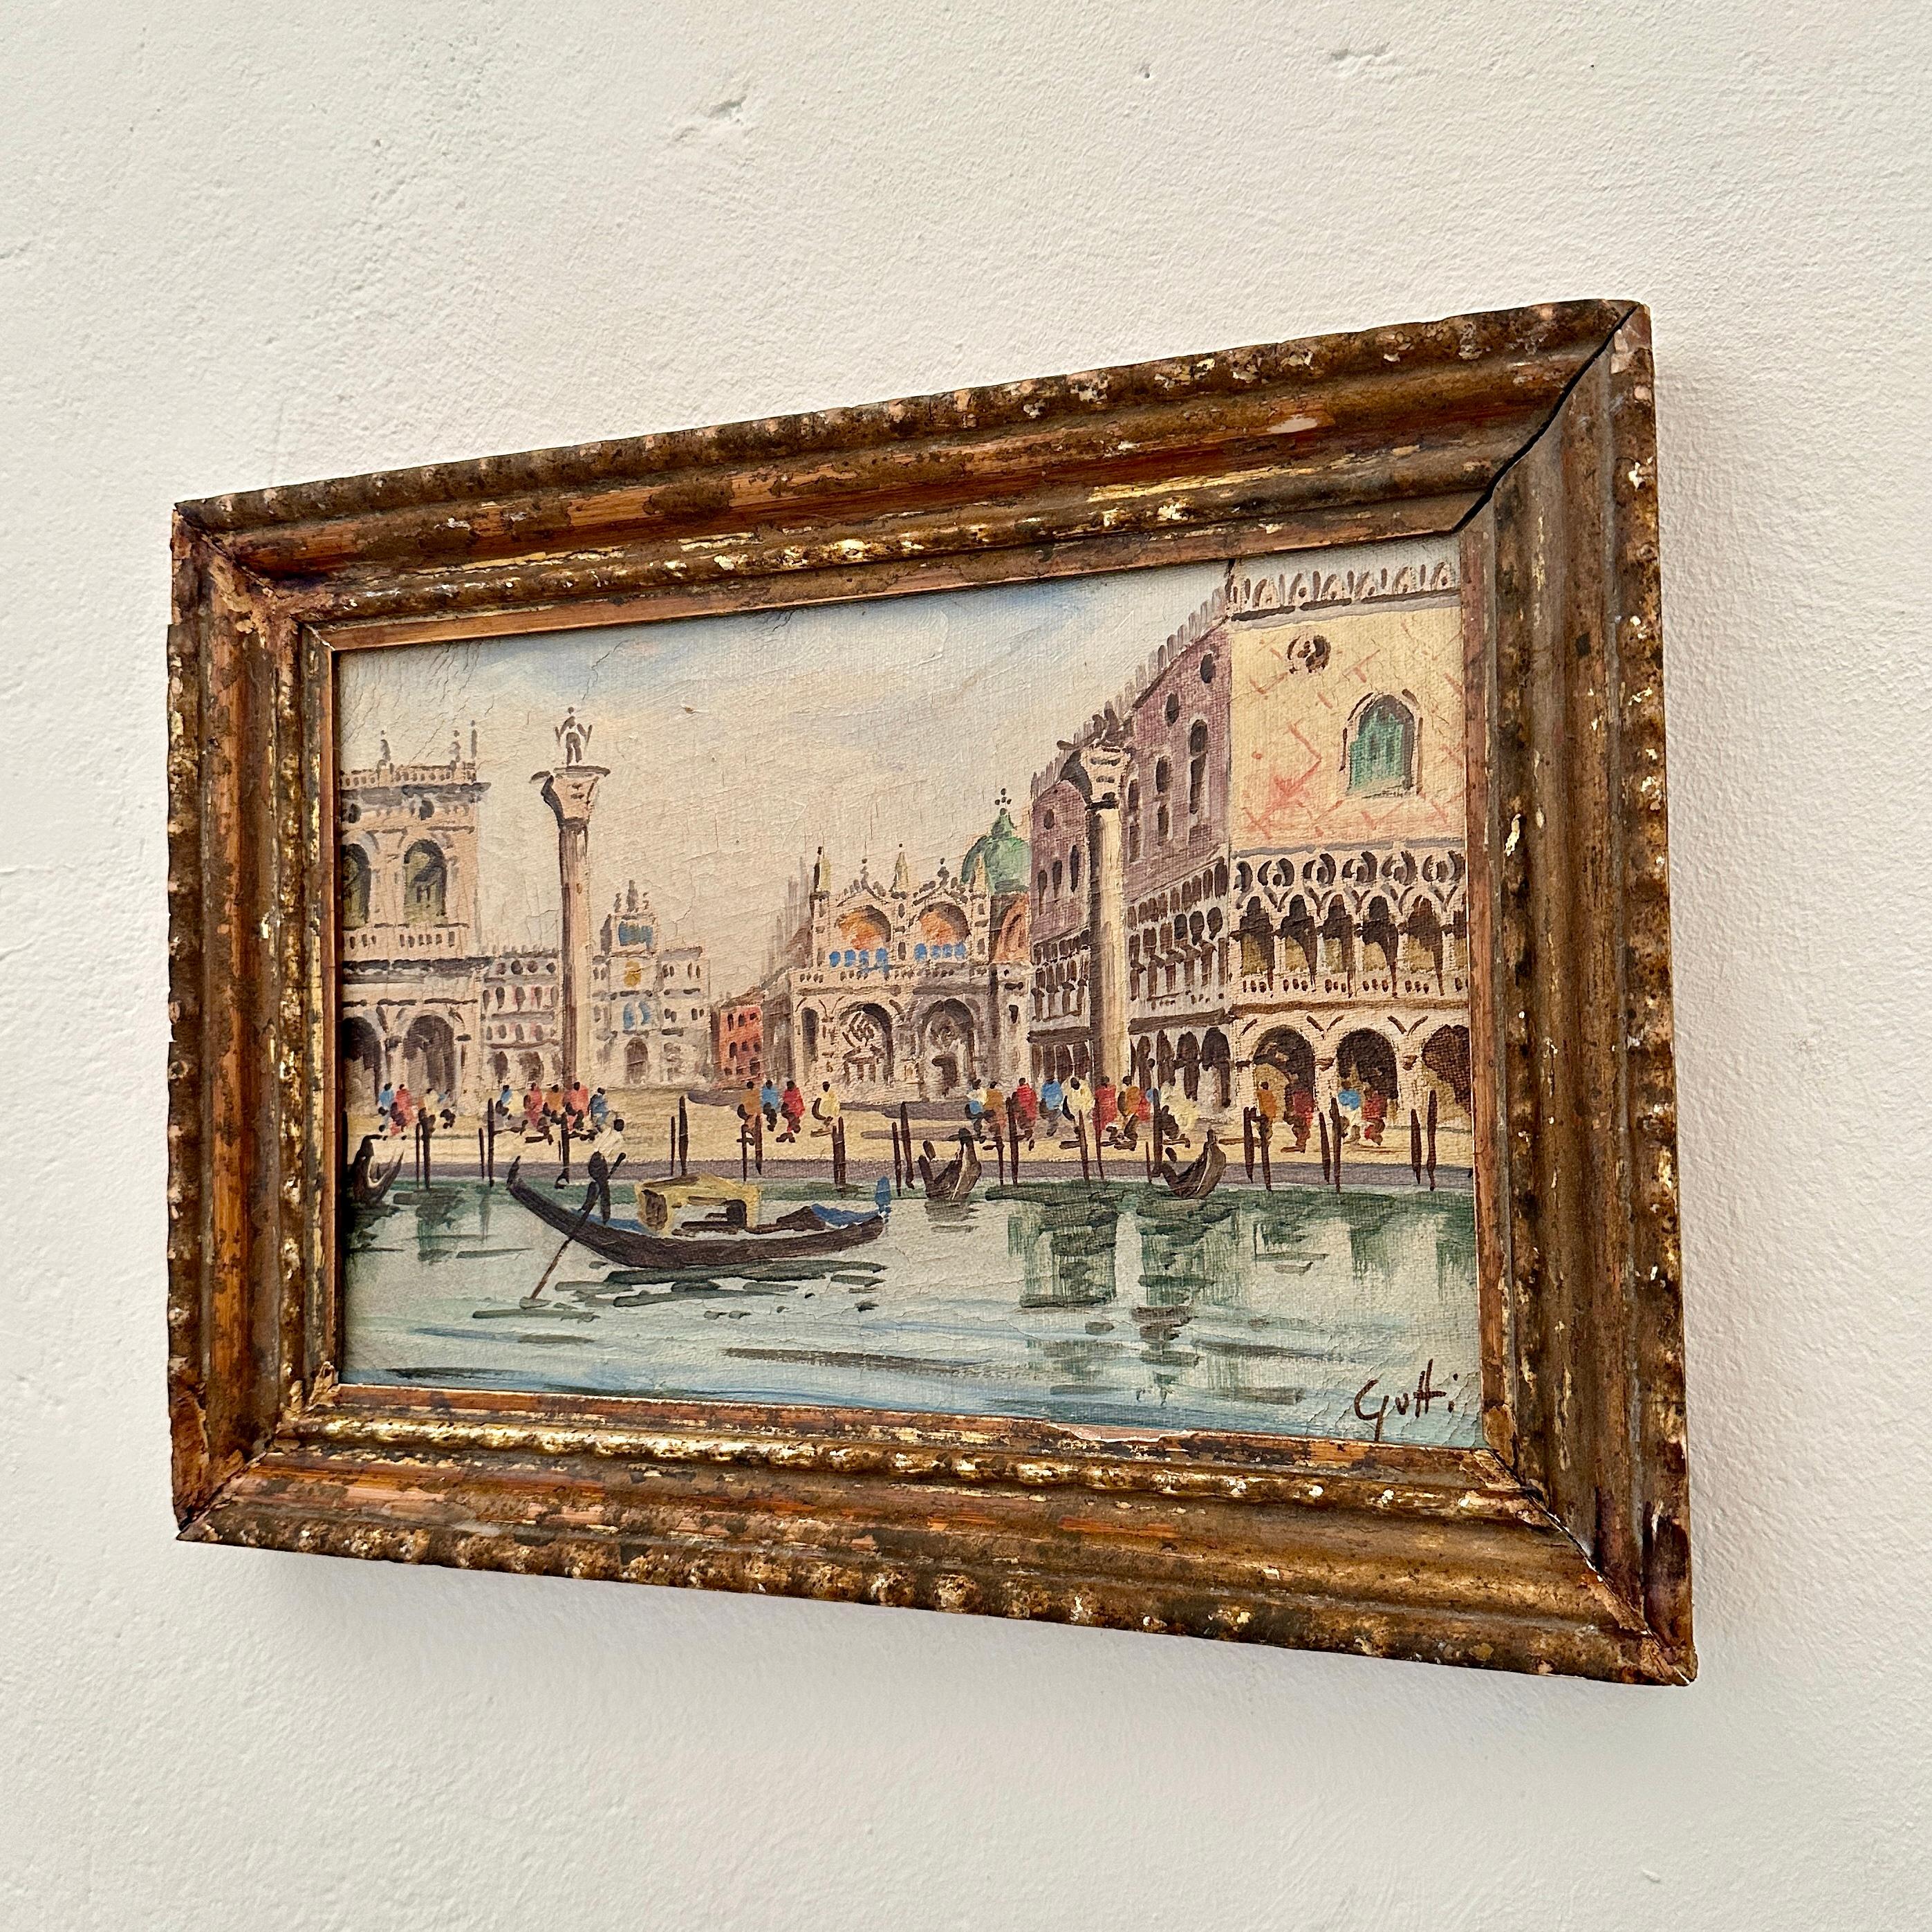 Fantastic Early 20th Century Oil Painting of Venice showing the Marcus Place from the Water. It was probably painted around 1904.
The Painting is framed in a 18th Century gilded Frame.
Great original condition and Patina.
A unique piece which is a